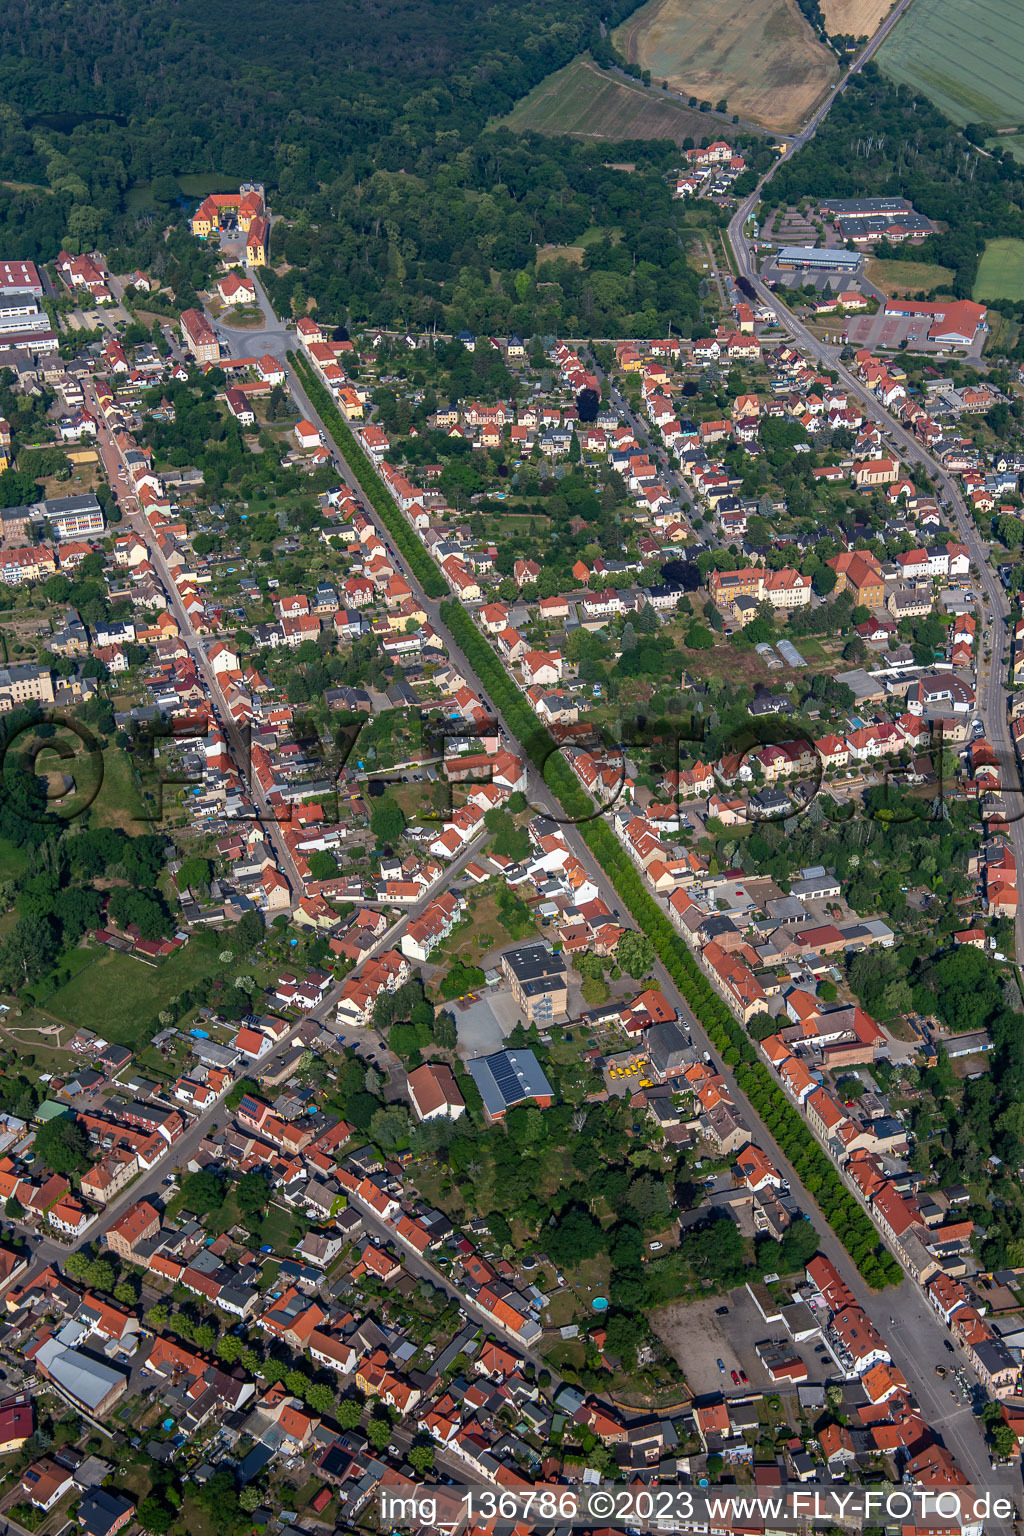 Aerial view of Avenue to the castle in Ballenstedt in the state Saxony-Anhalt, Germany